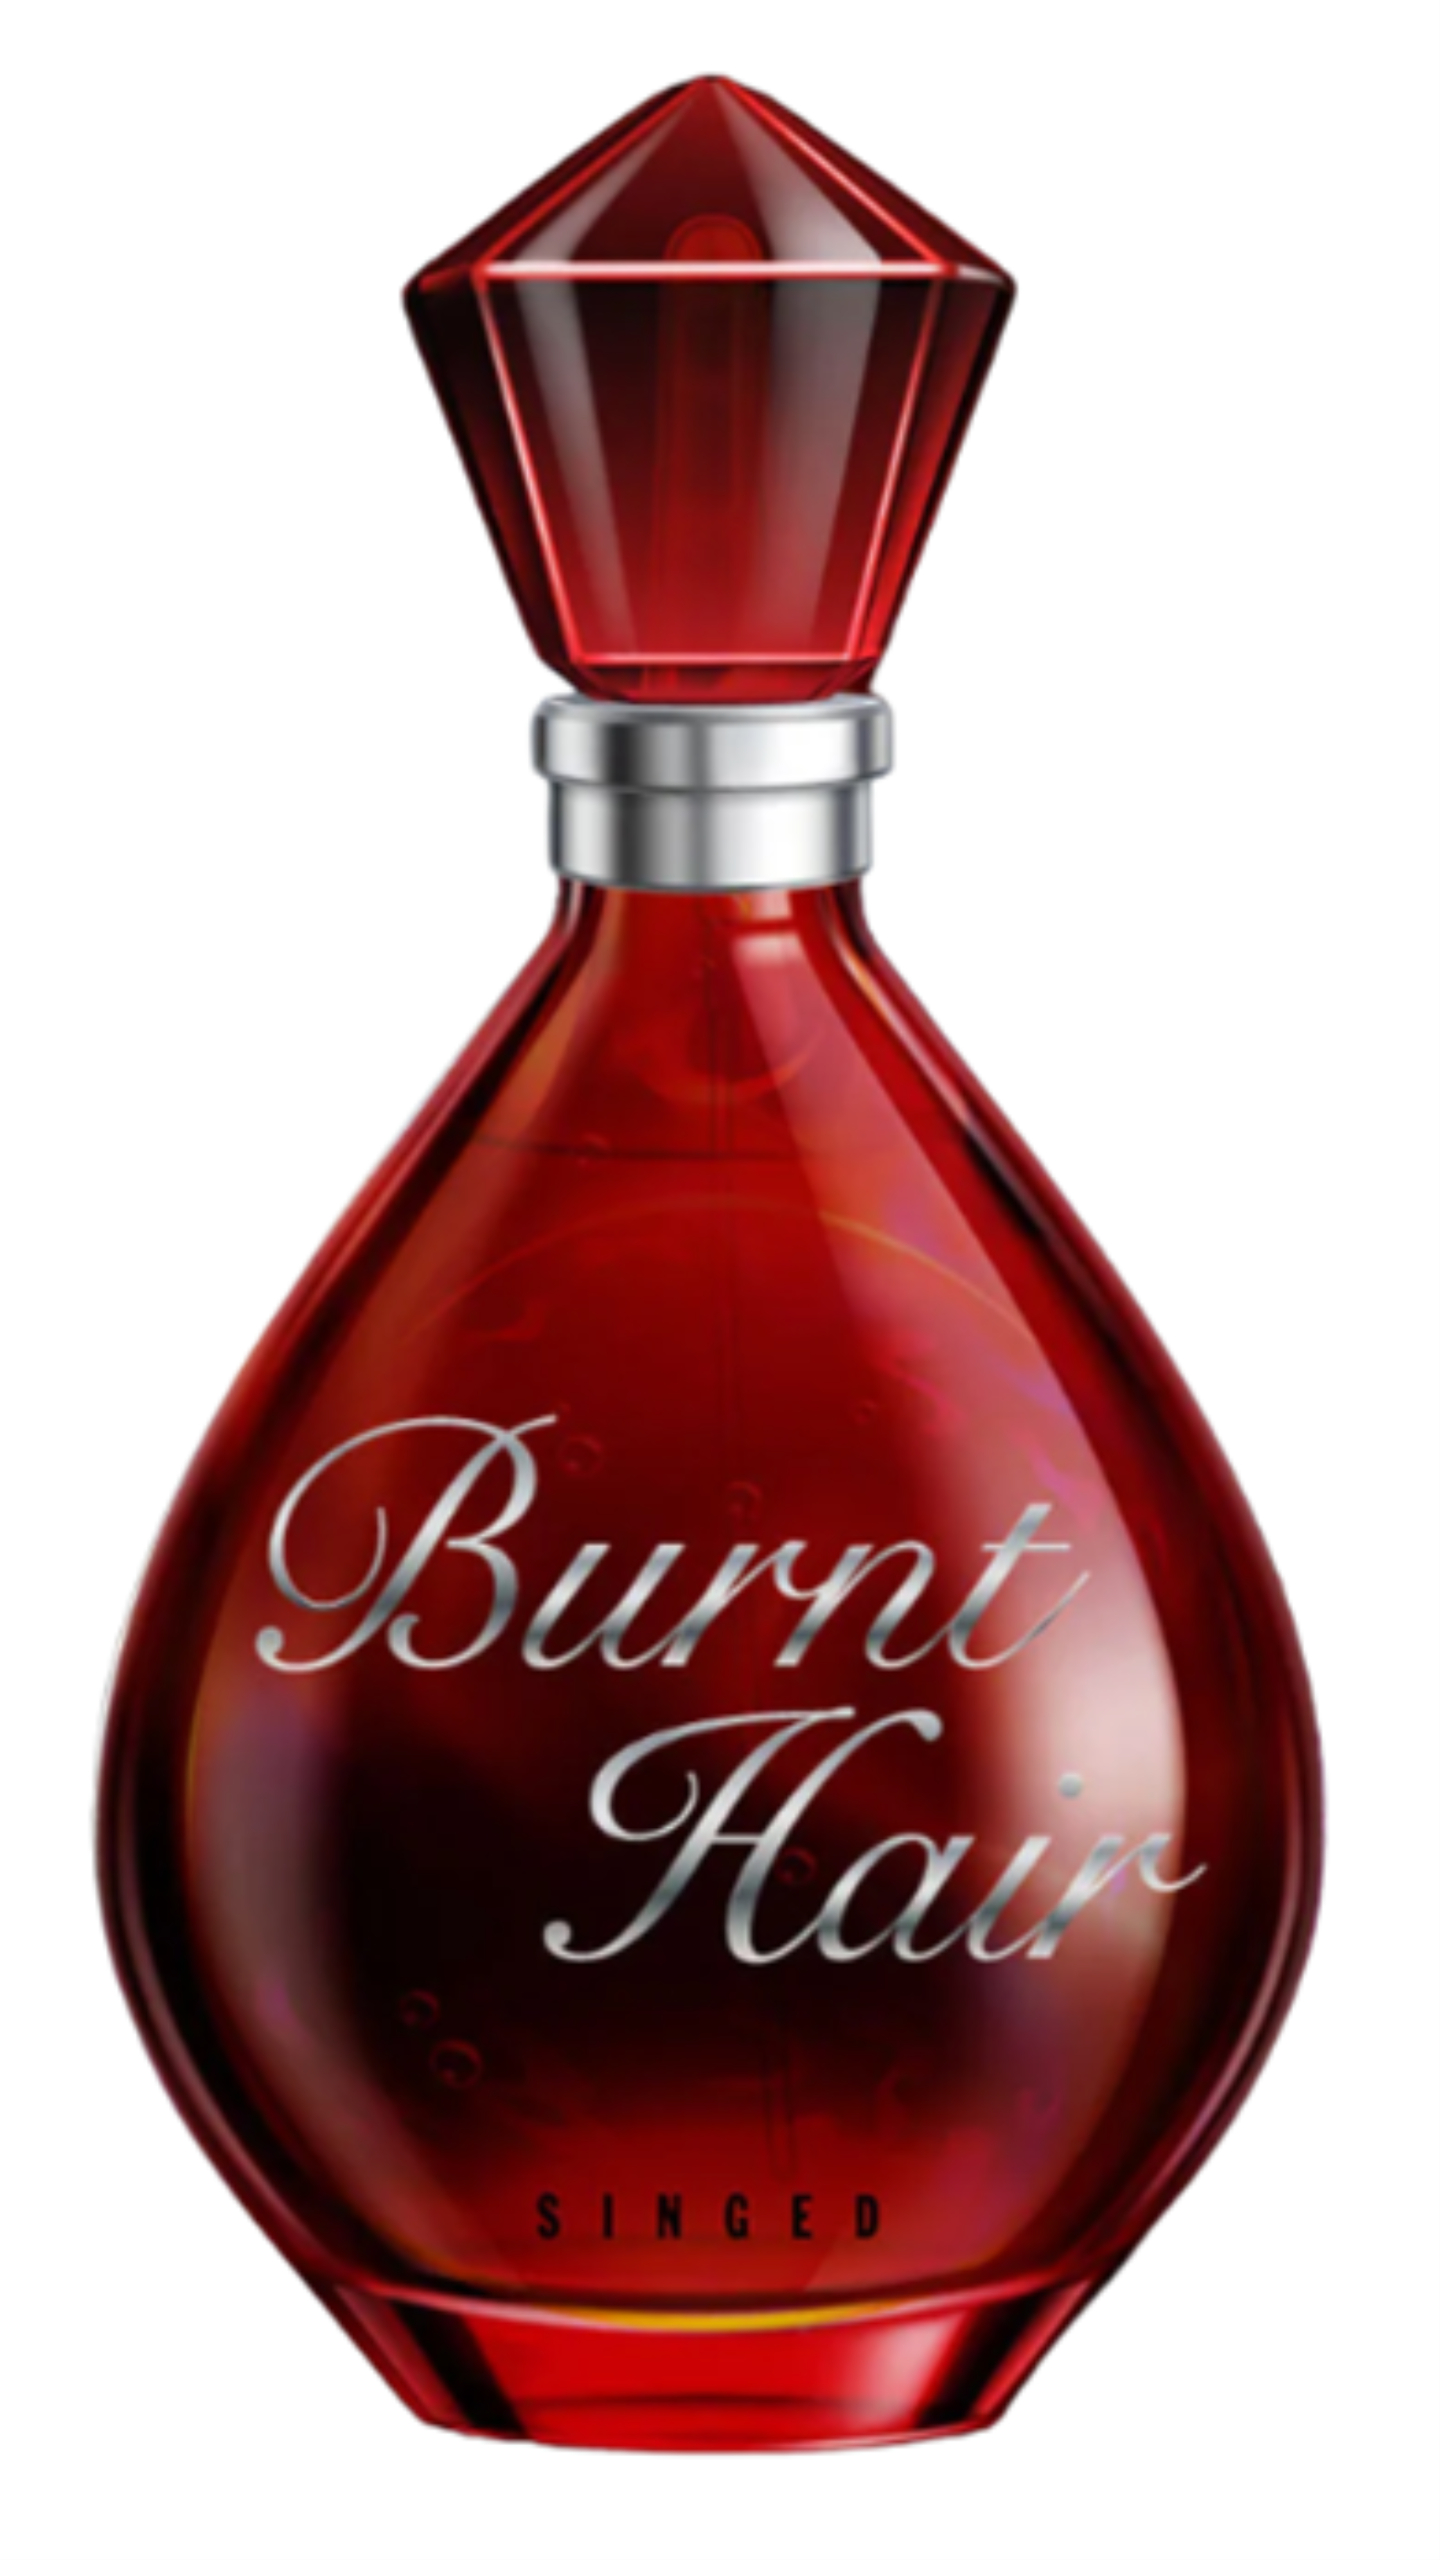 The Boring Company has a website for Elons Burnt Hair cologne